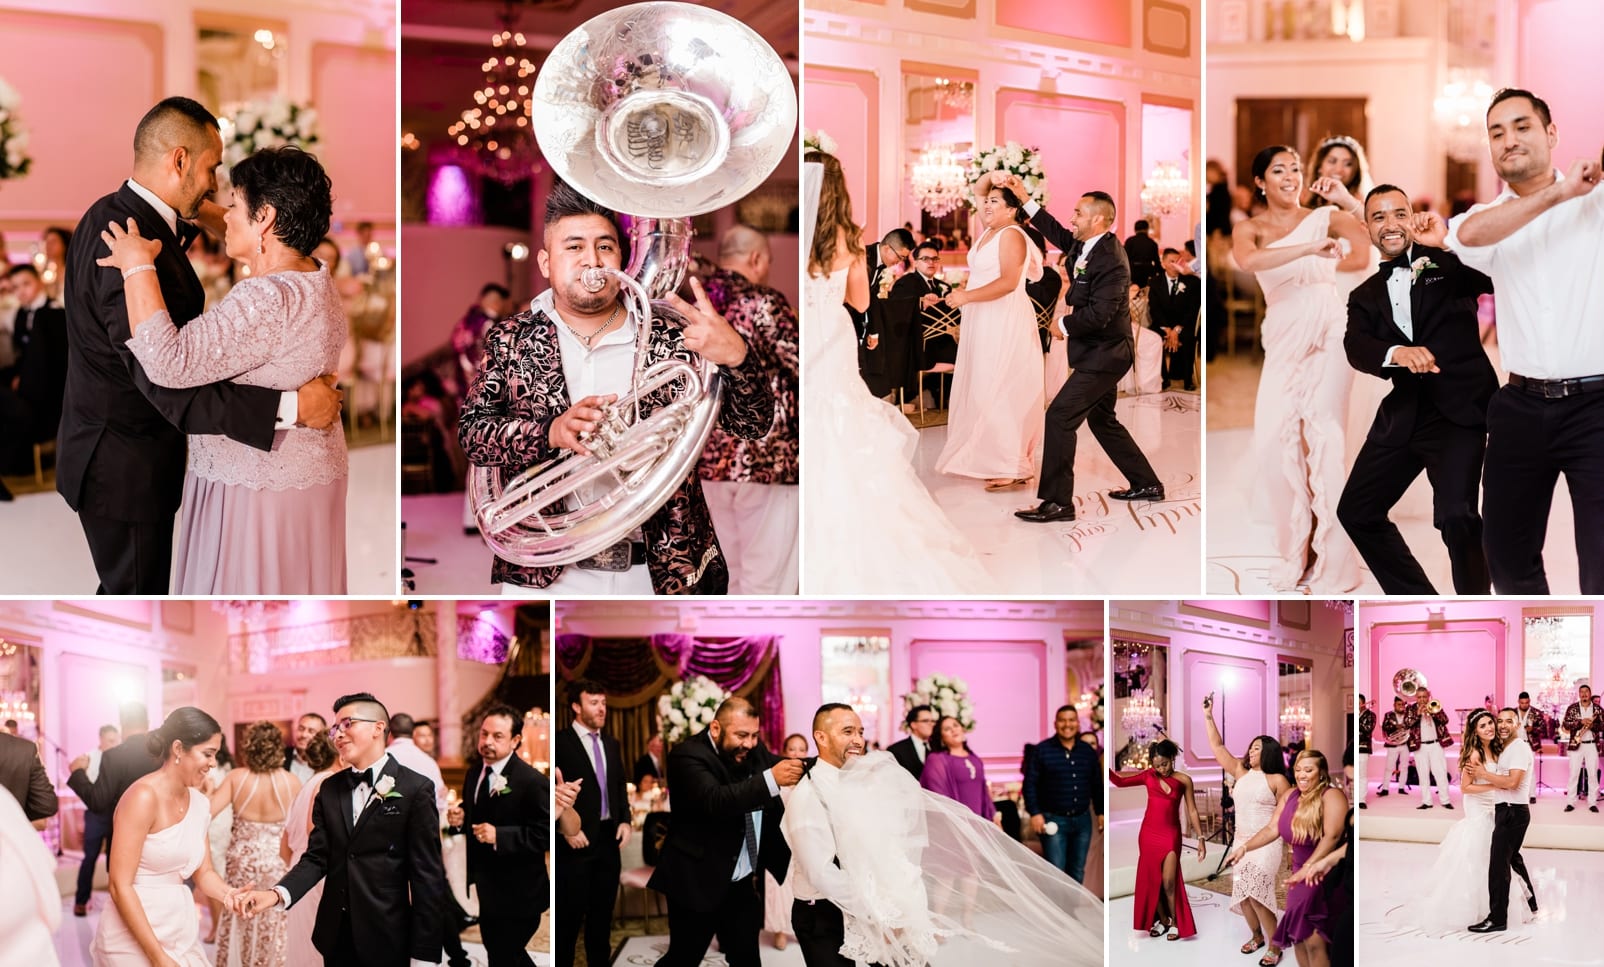 Grand Marquise Ballroom wedding reception guests and live band dancing photo